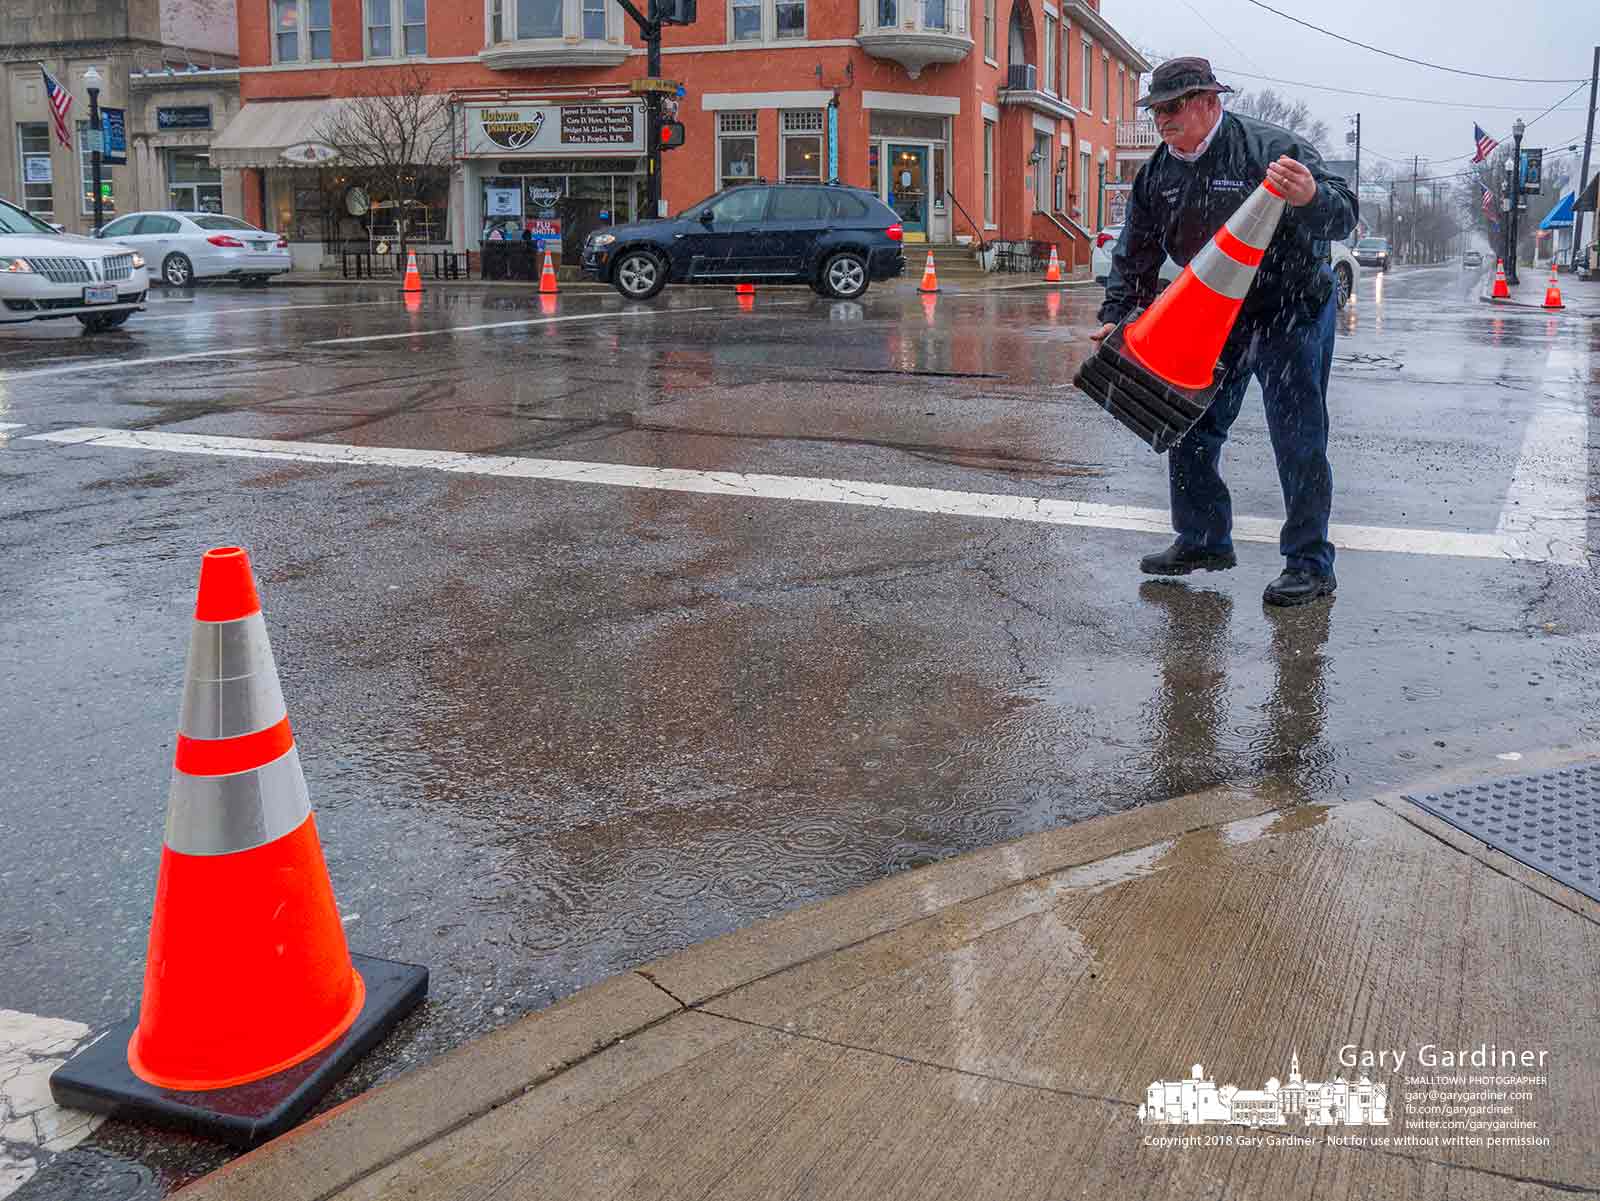 A Westerville firefighter retrieves traffic cones placed on the corners of State and Main to test the turn radius if the sidewalks were extended into bumpouts as proposed in the Uptown Streetscape plans. My Final Photo for March 1, 2018.